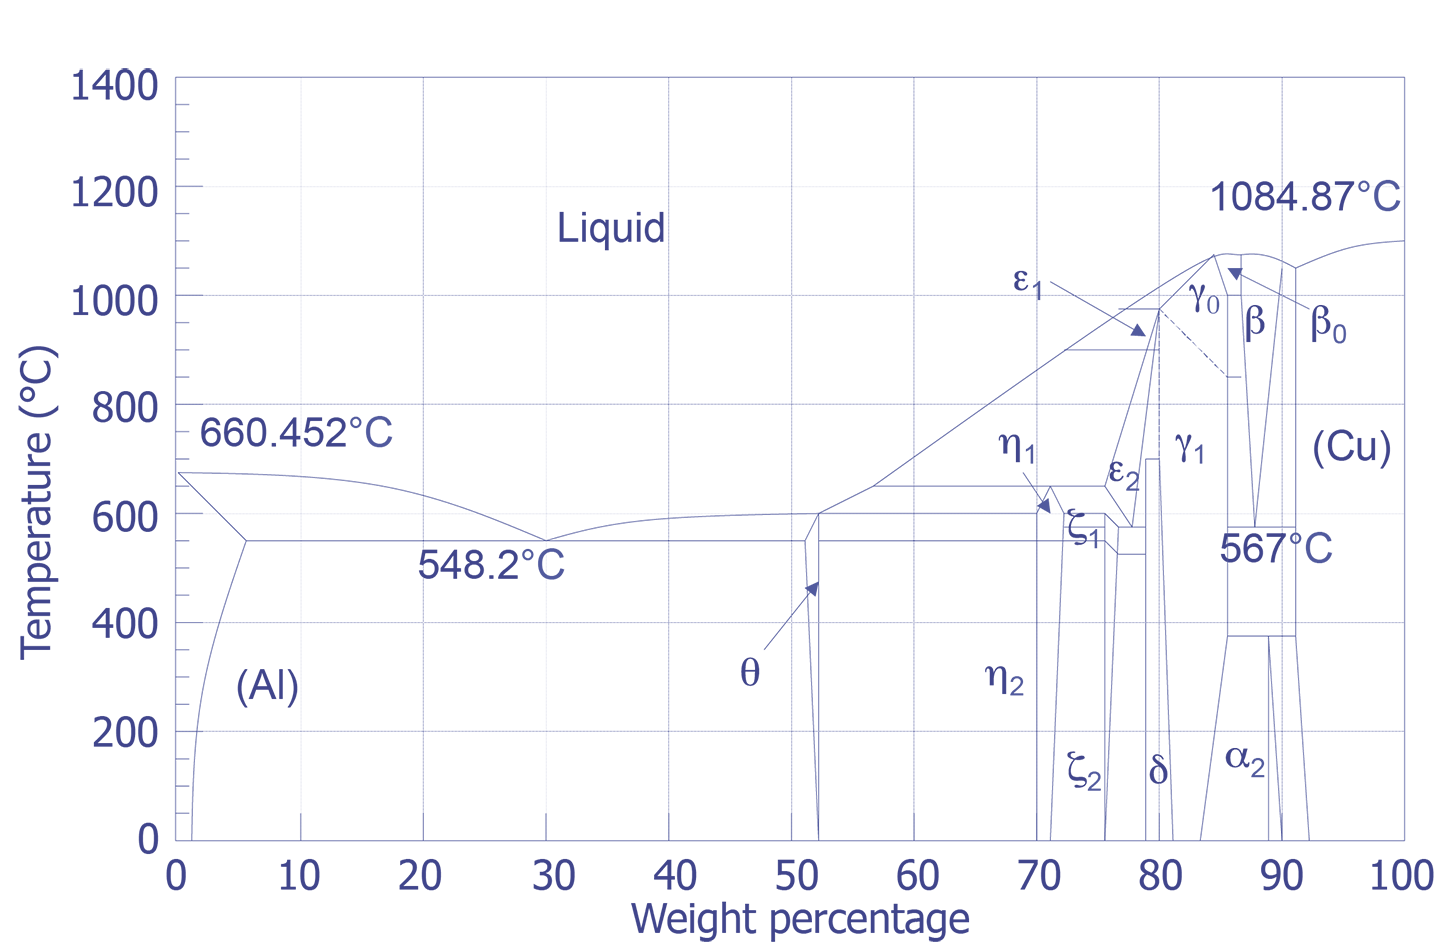 A Aluminum Silicon Phase Diagram B Schematic Of A Phase